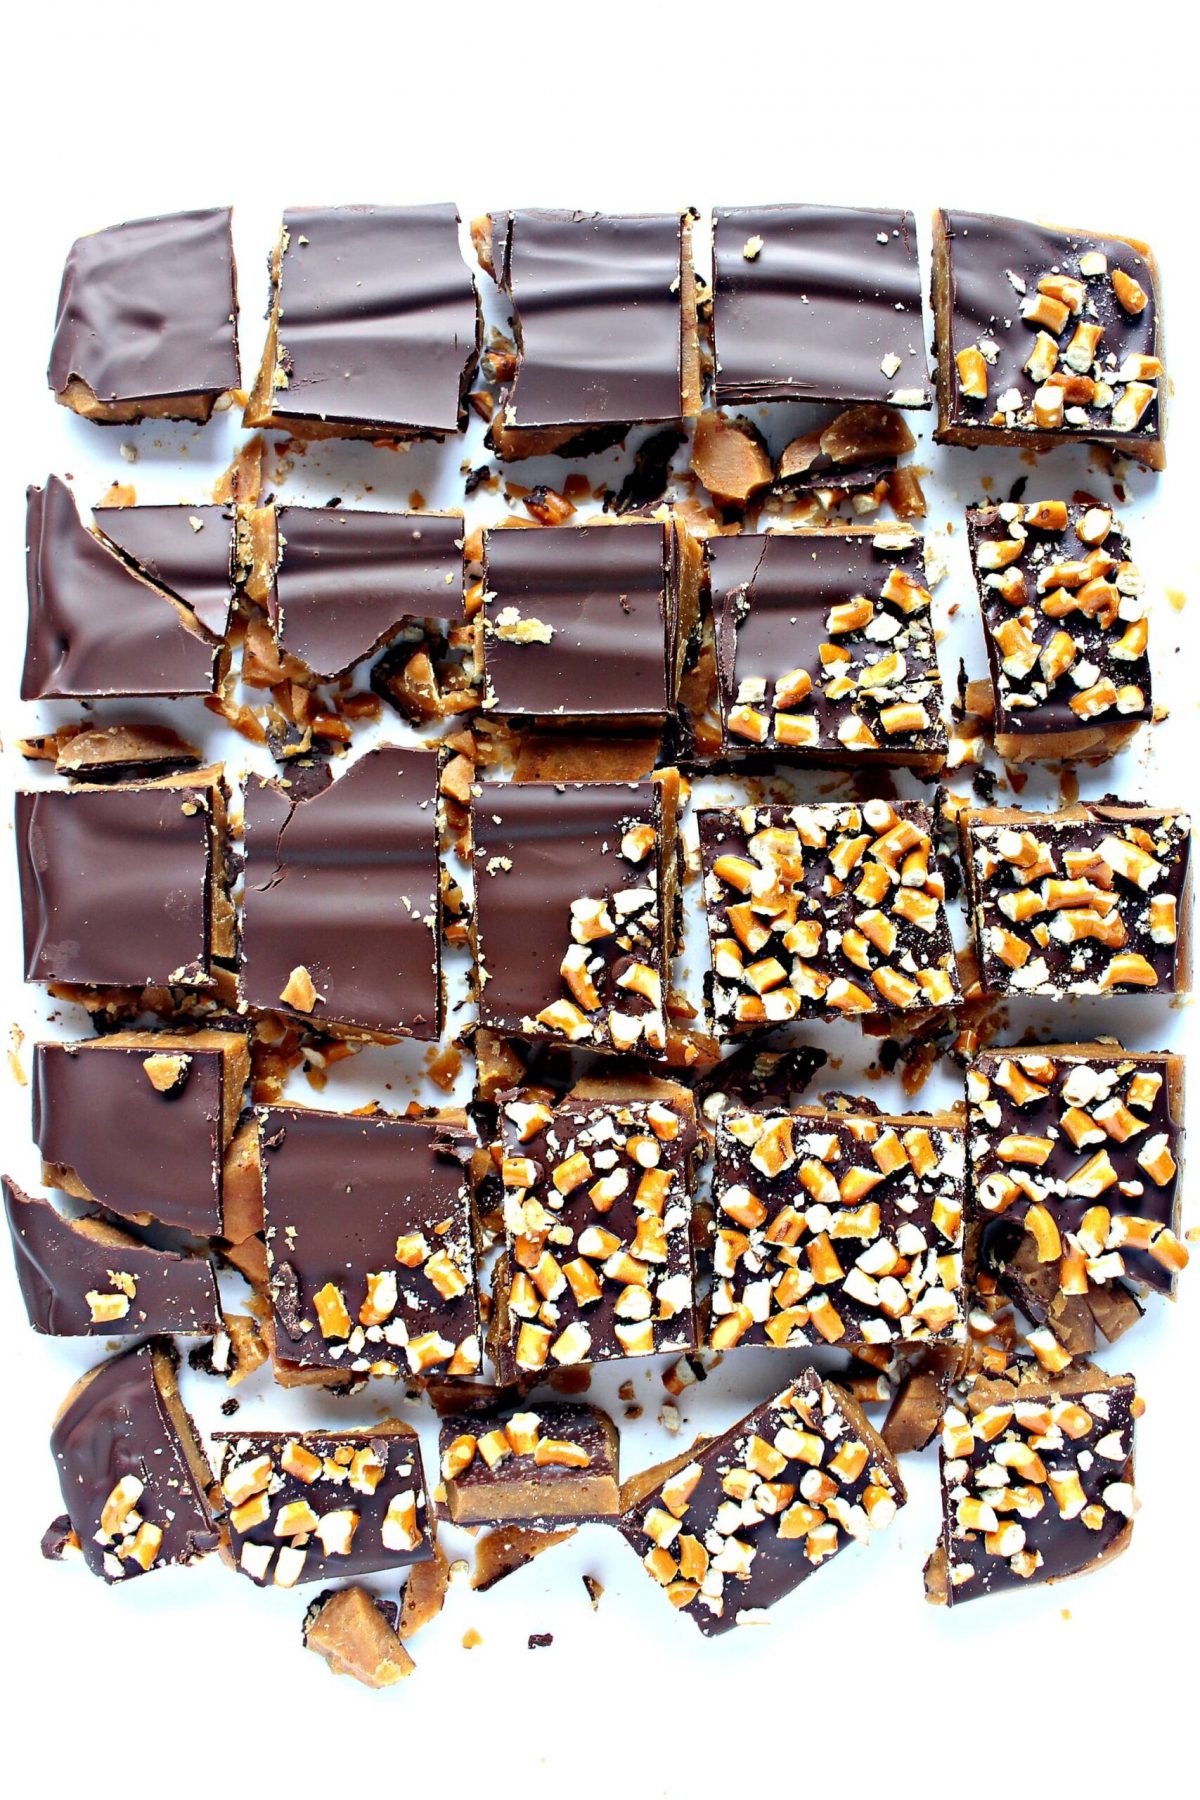 chocolate covered toffee sprinkled with chopped pretzels and cut into squares